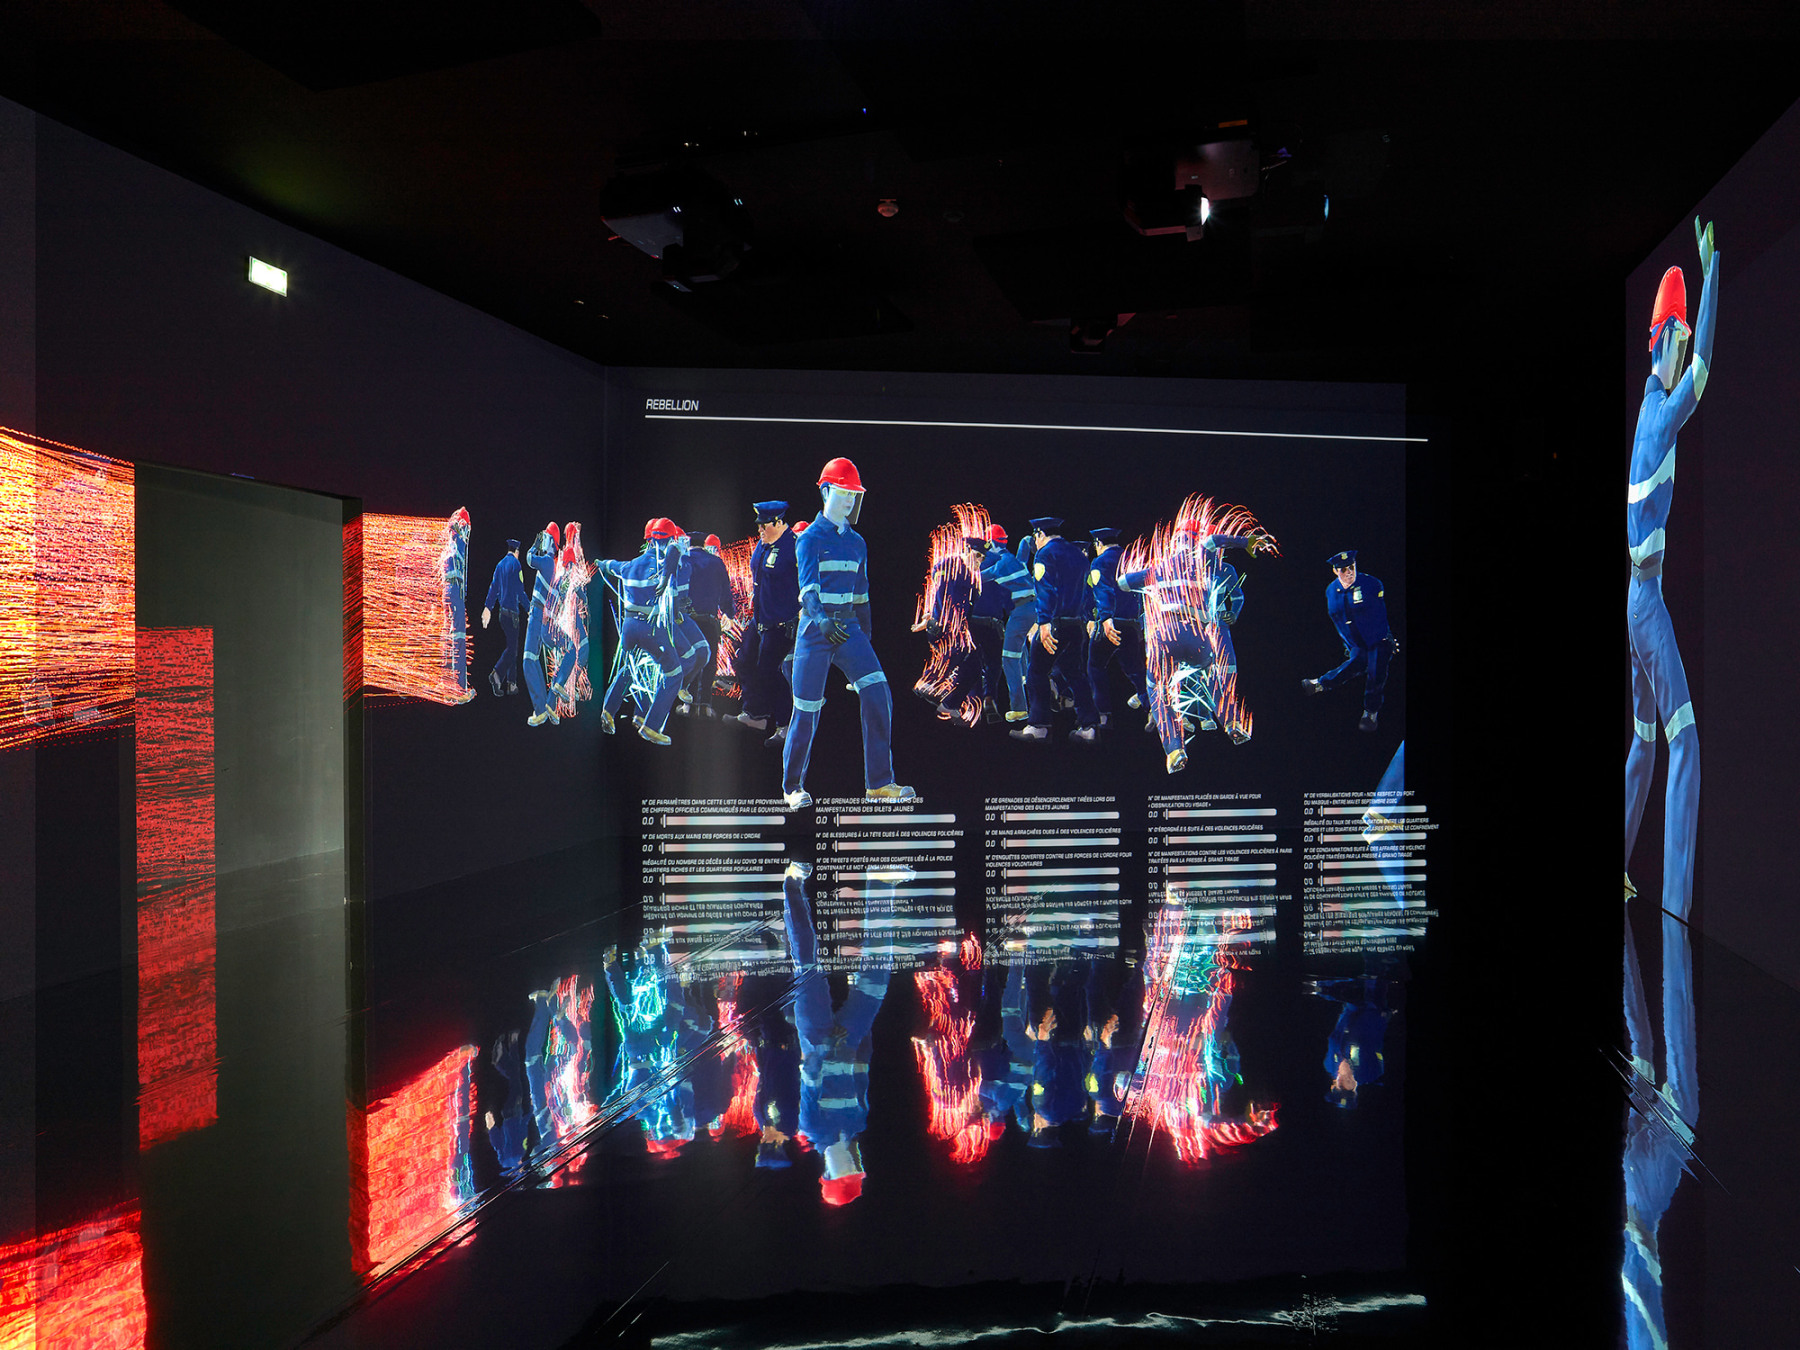 Hito Steyerl,&nbsp;Hito Steyerl: I Will Survive, May 19 - July 5, 2021,&nbsp;Centre Pompidou, Paris, France